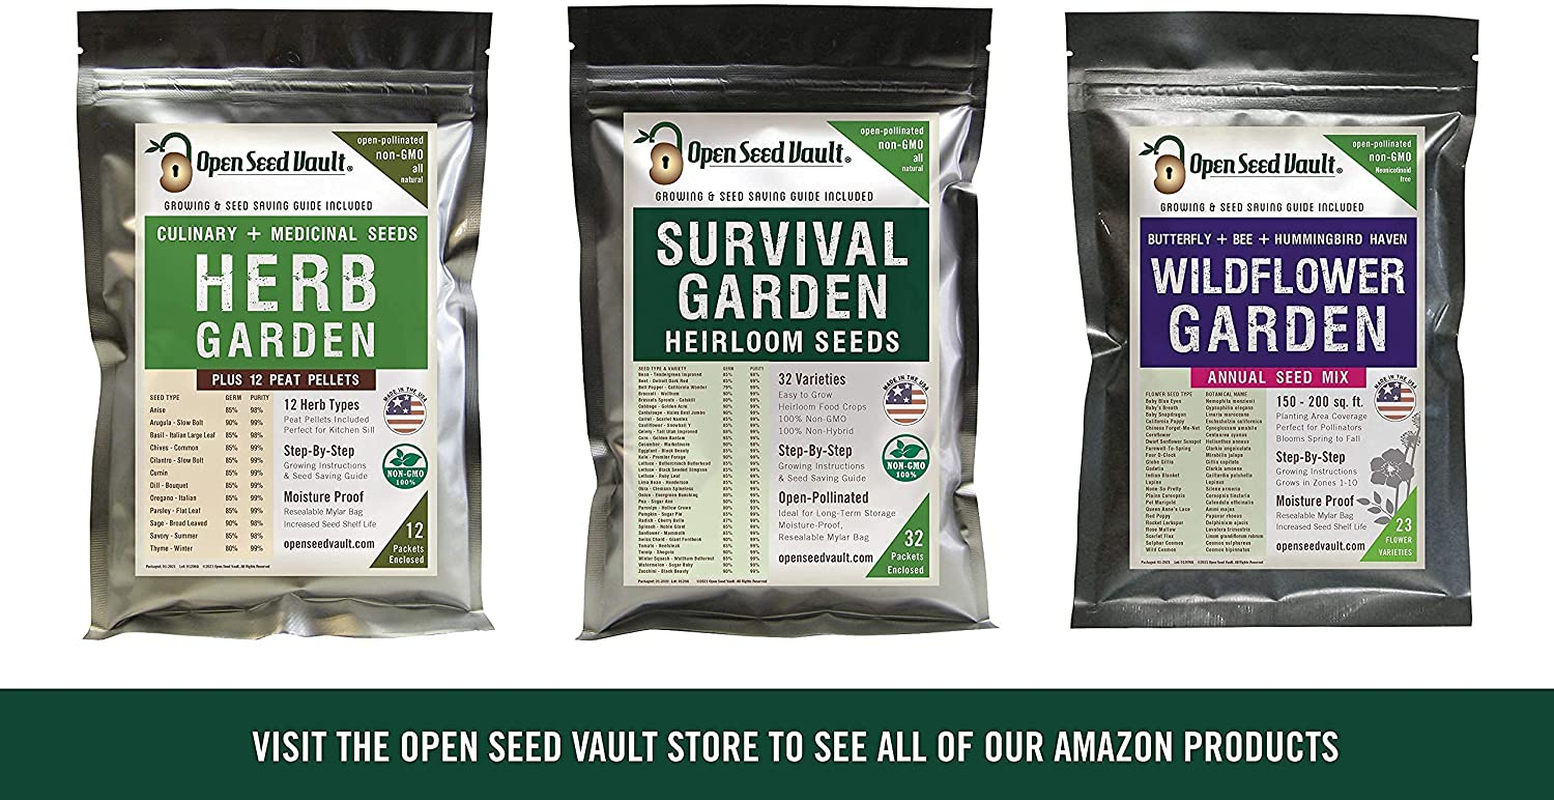 (32) Variety Pack Survival Gear Food Seeds | 15,000 Non GMO Heirloom Seeds for Planting Vegetables and Fruits. Survival Food for Your Survival Kit, Gardening Gifts & Emergency Supplies | Garden Vegetable Seeds. by Open Seed Vault